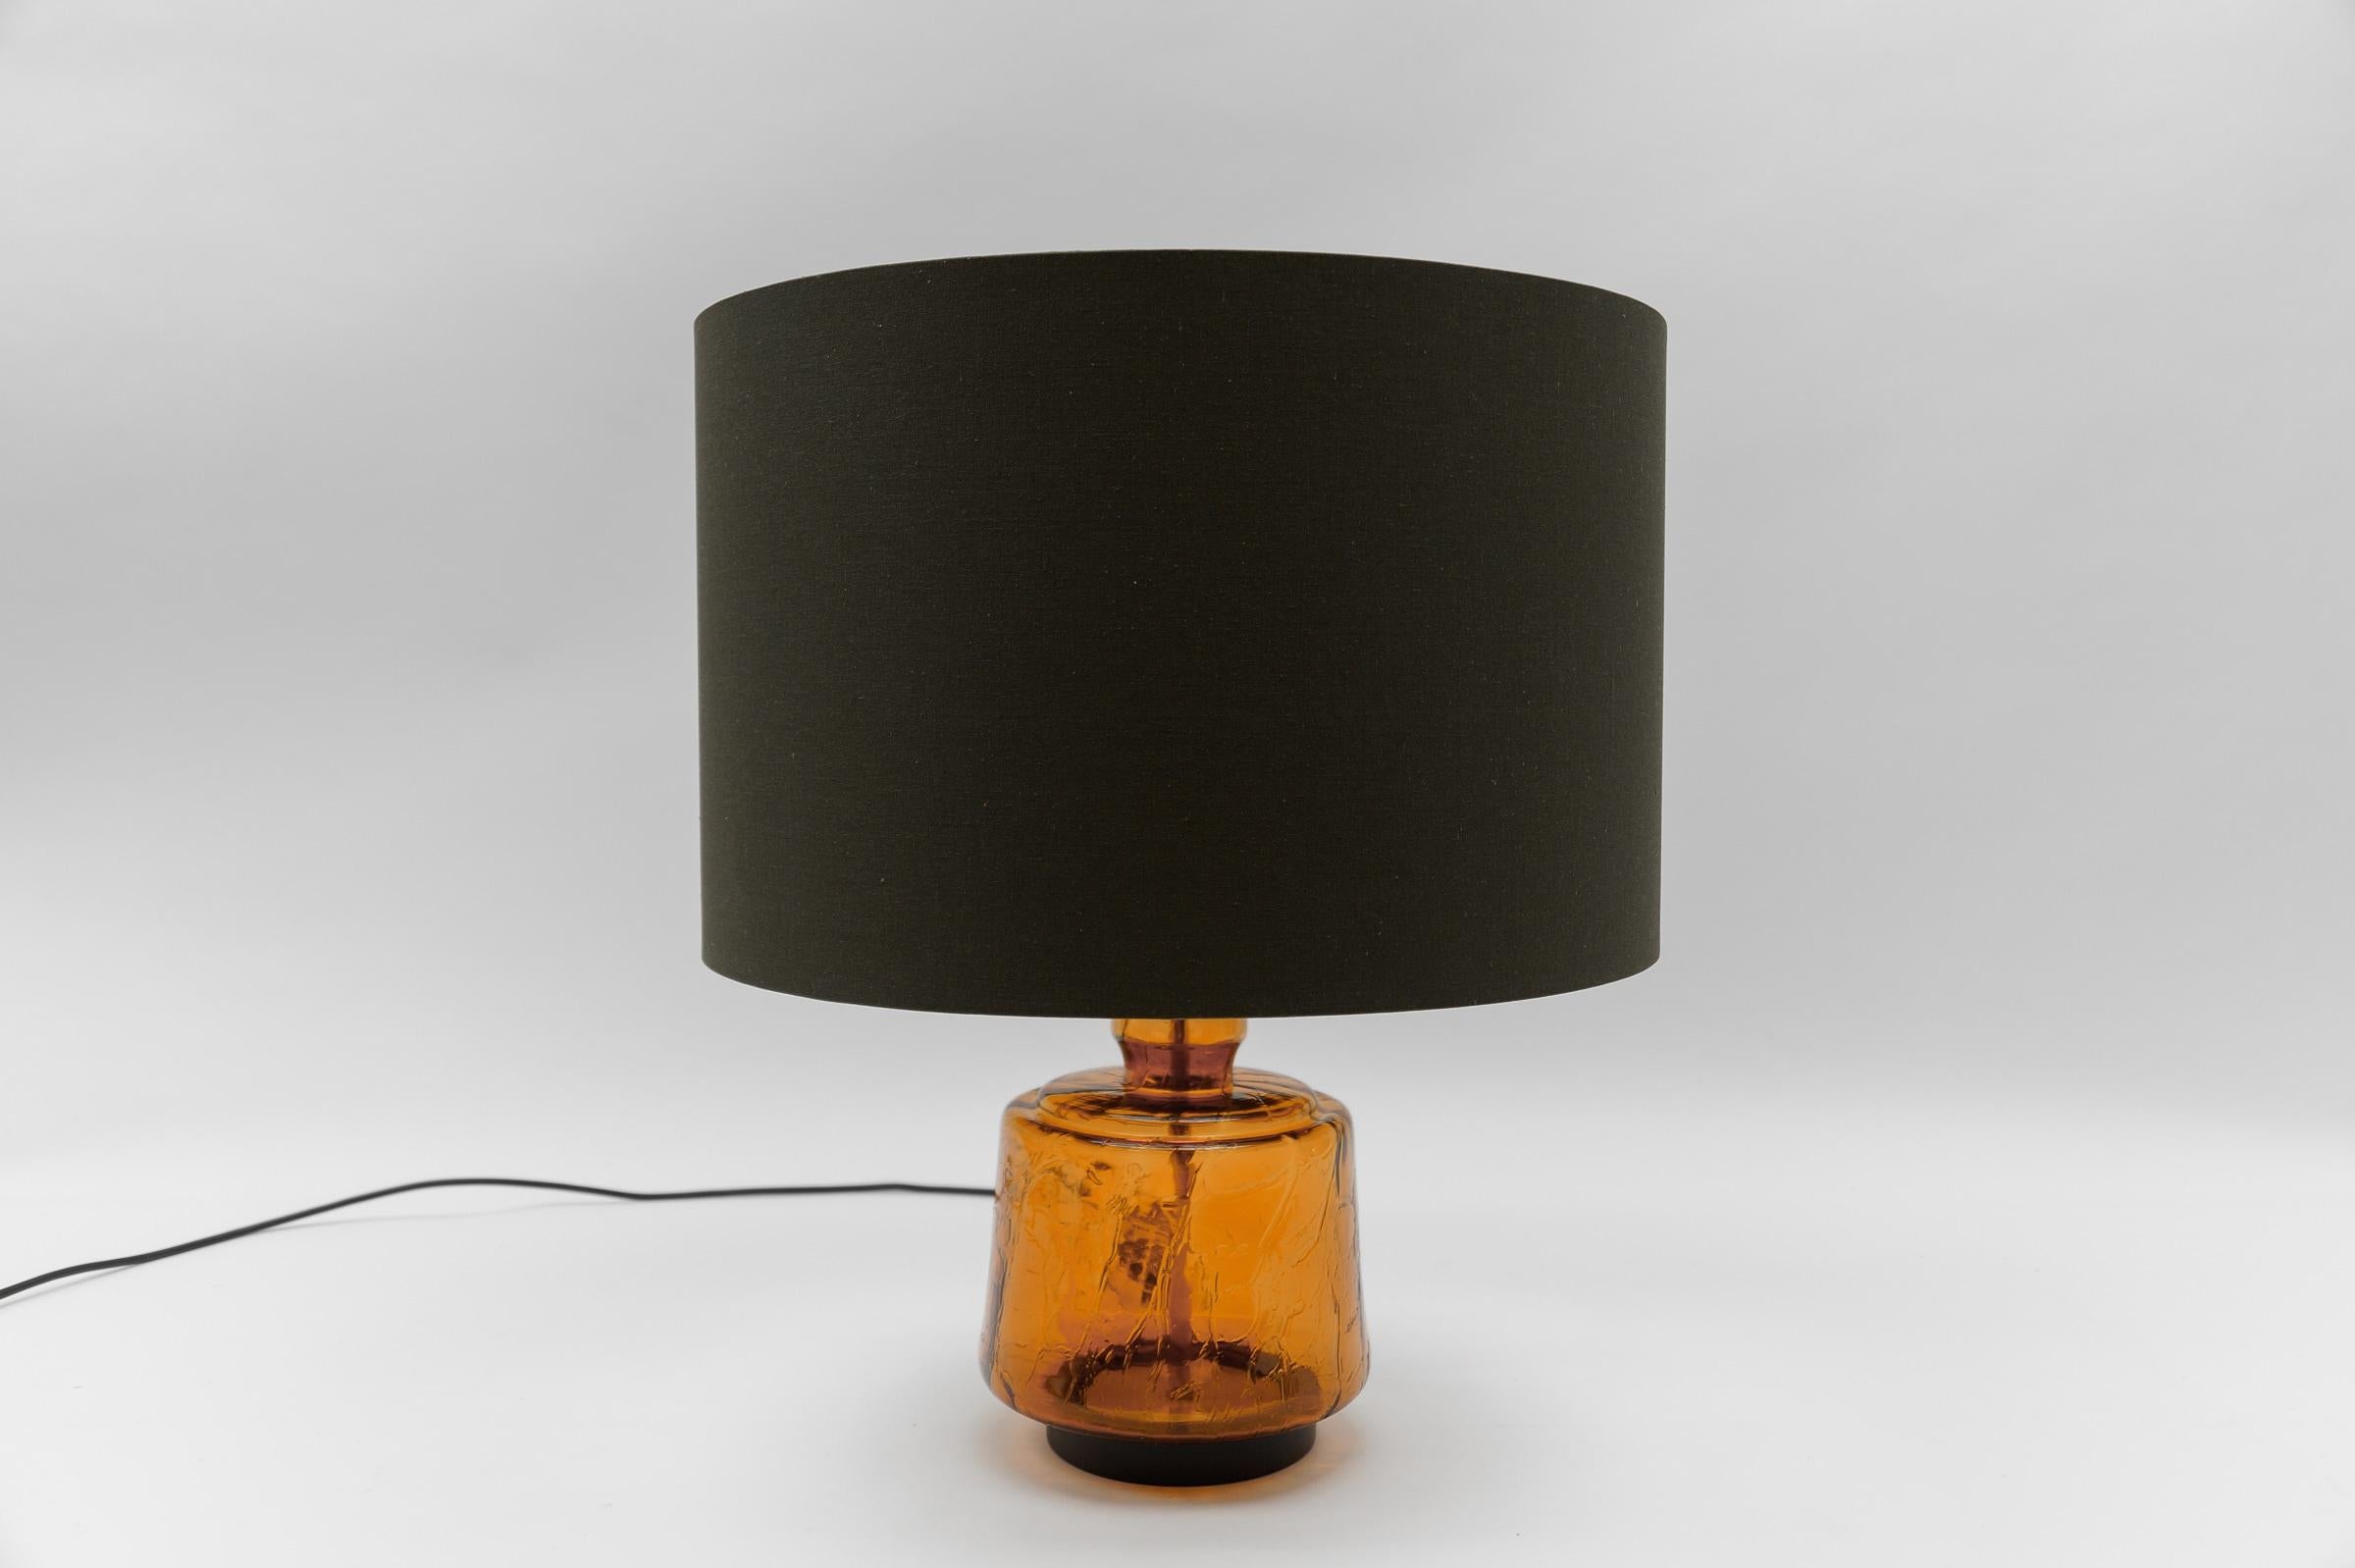 Mid Century Modern Orange Glass Table Lamp Base, 1960s

The lampshade is to illustrate how the lamp base looks with a shade. The shade has a diameter of 17.71 in. (45 cm) and height 11.41 in. (29 cm).

Dimensions
Diameter: 7.48 in. (19 cm)
Height